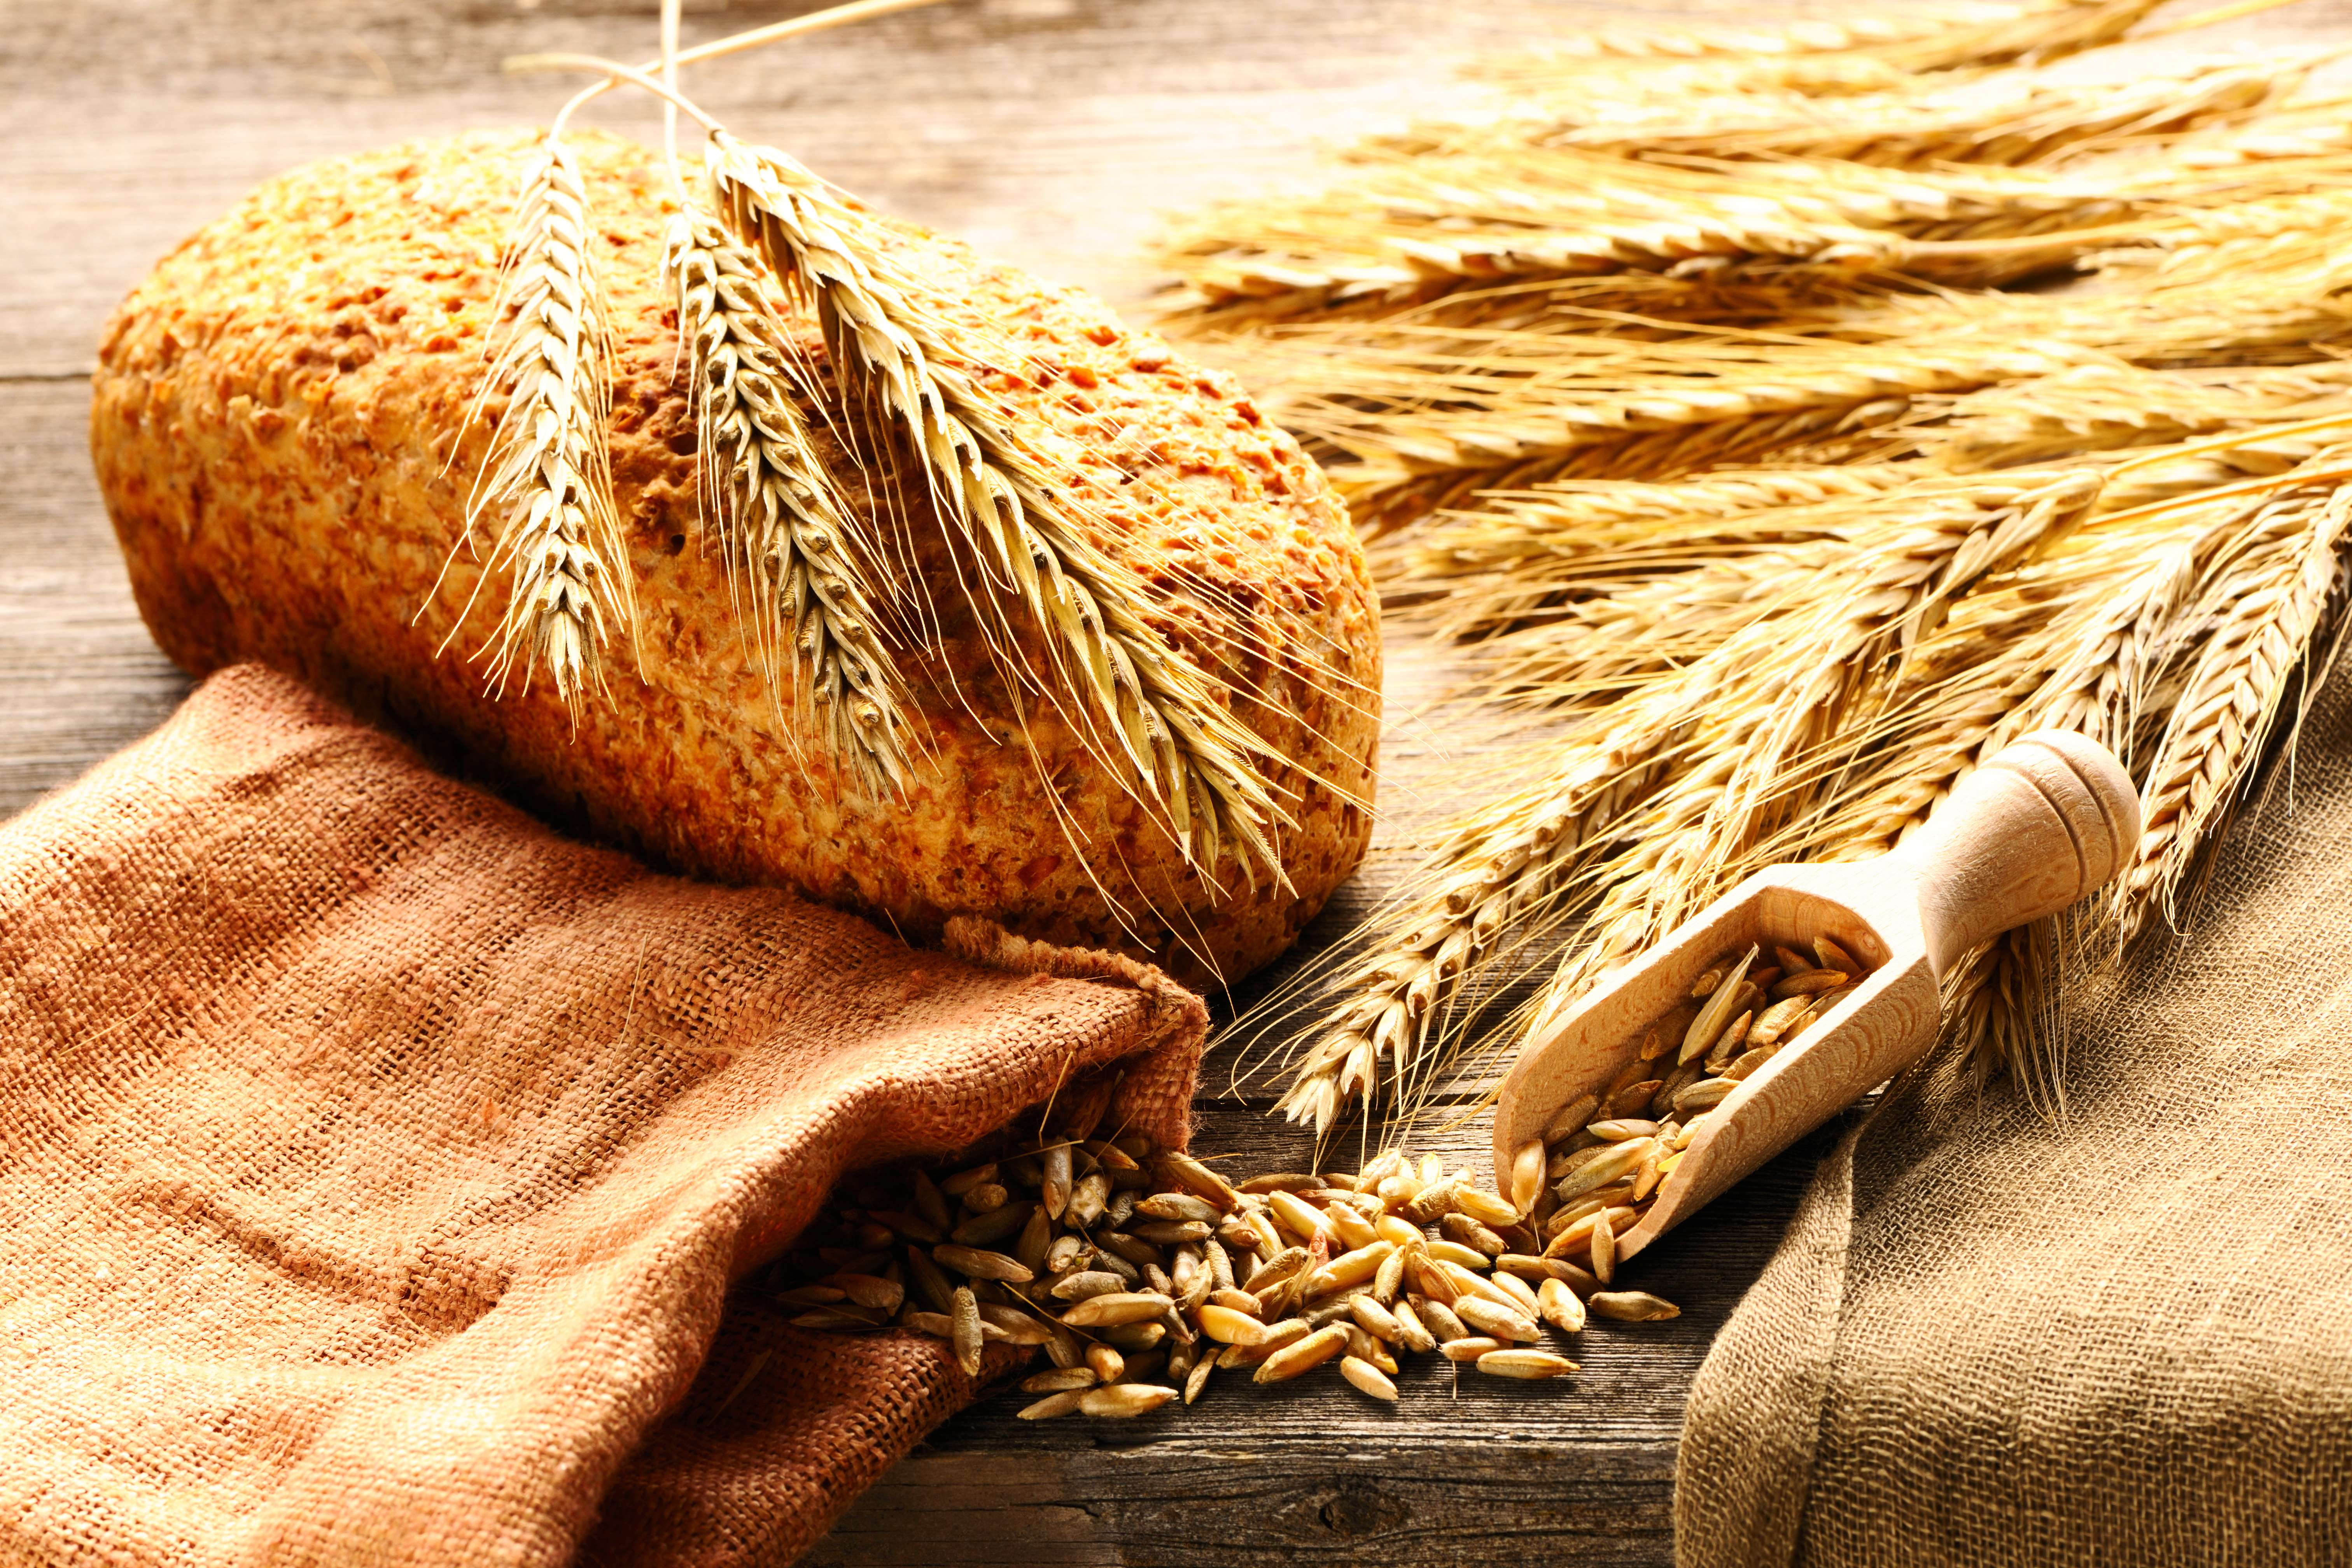 Rye spikelets and bread still life on wooden background